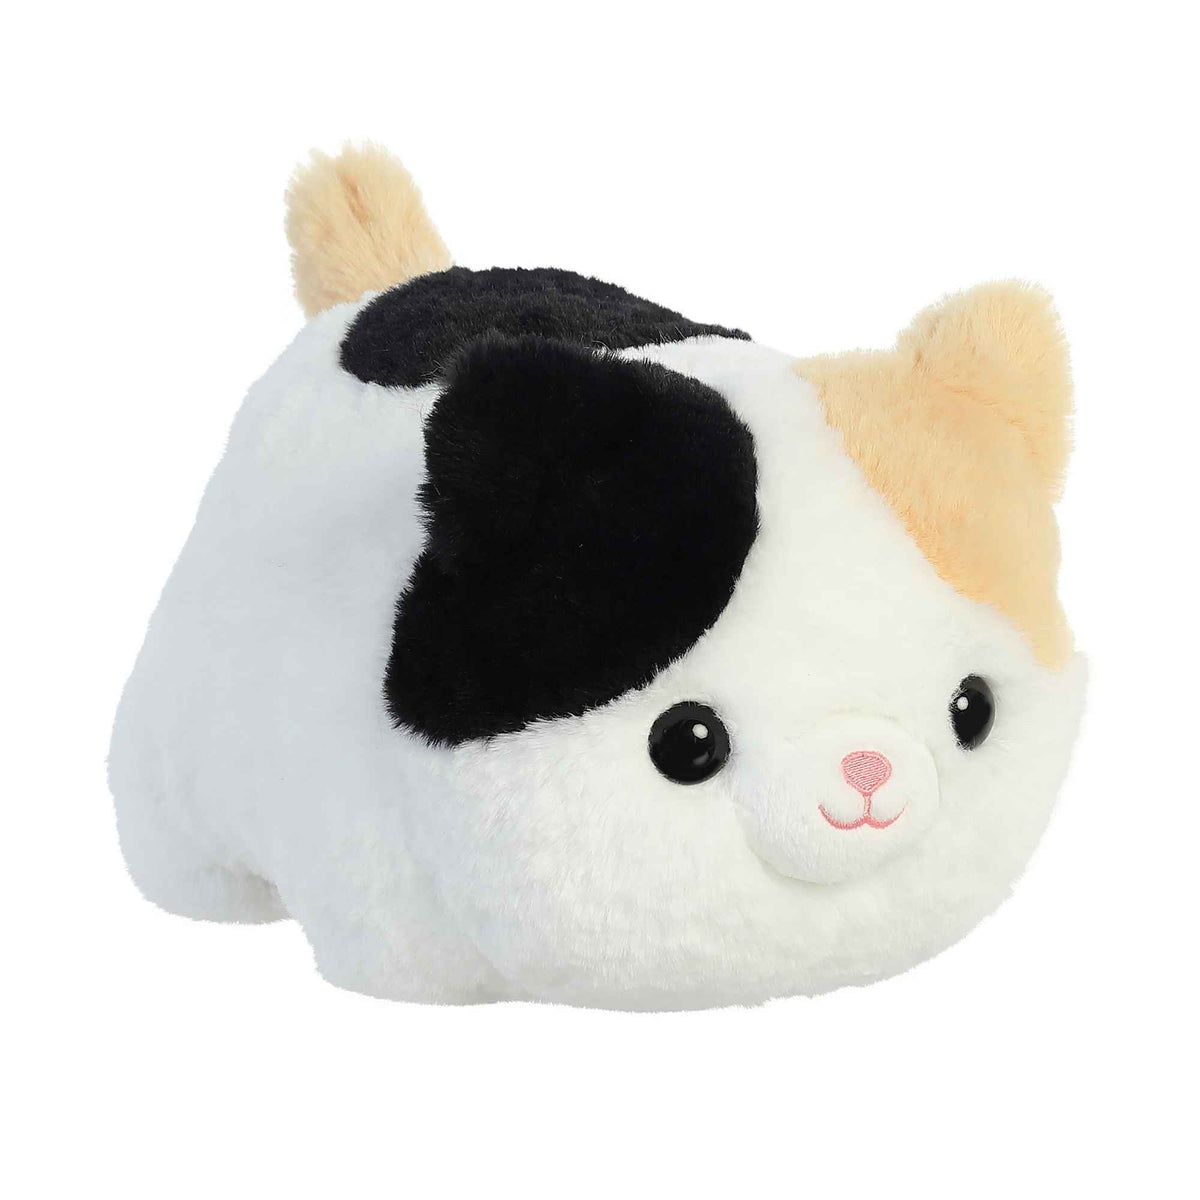 Callie Cat plush from the Spudsters collection by Aurora, with black and tan coloration on a plush white body